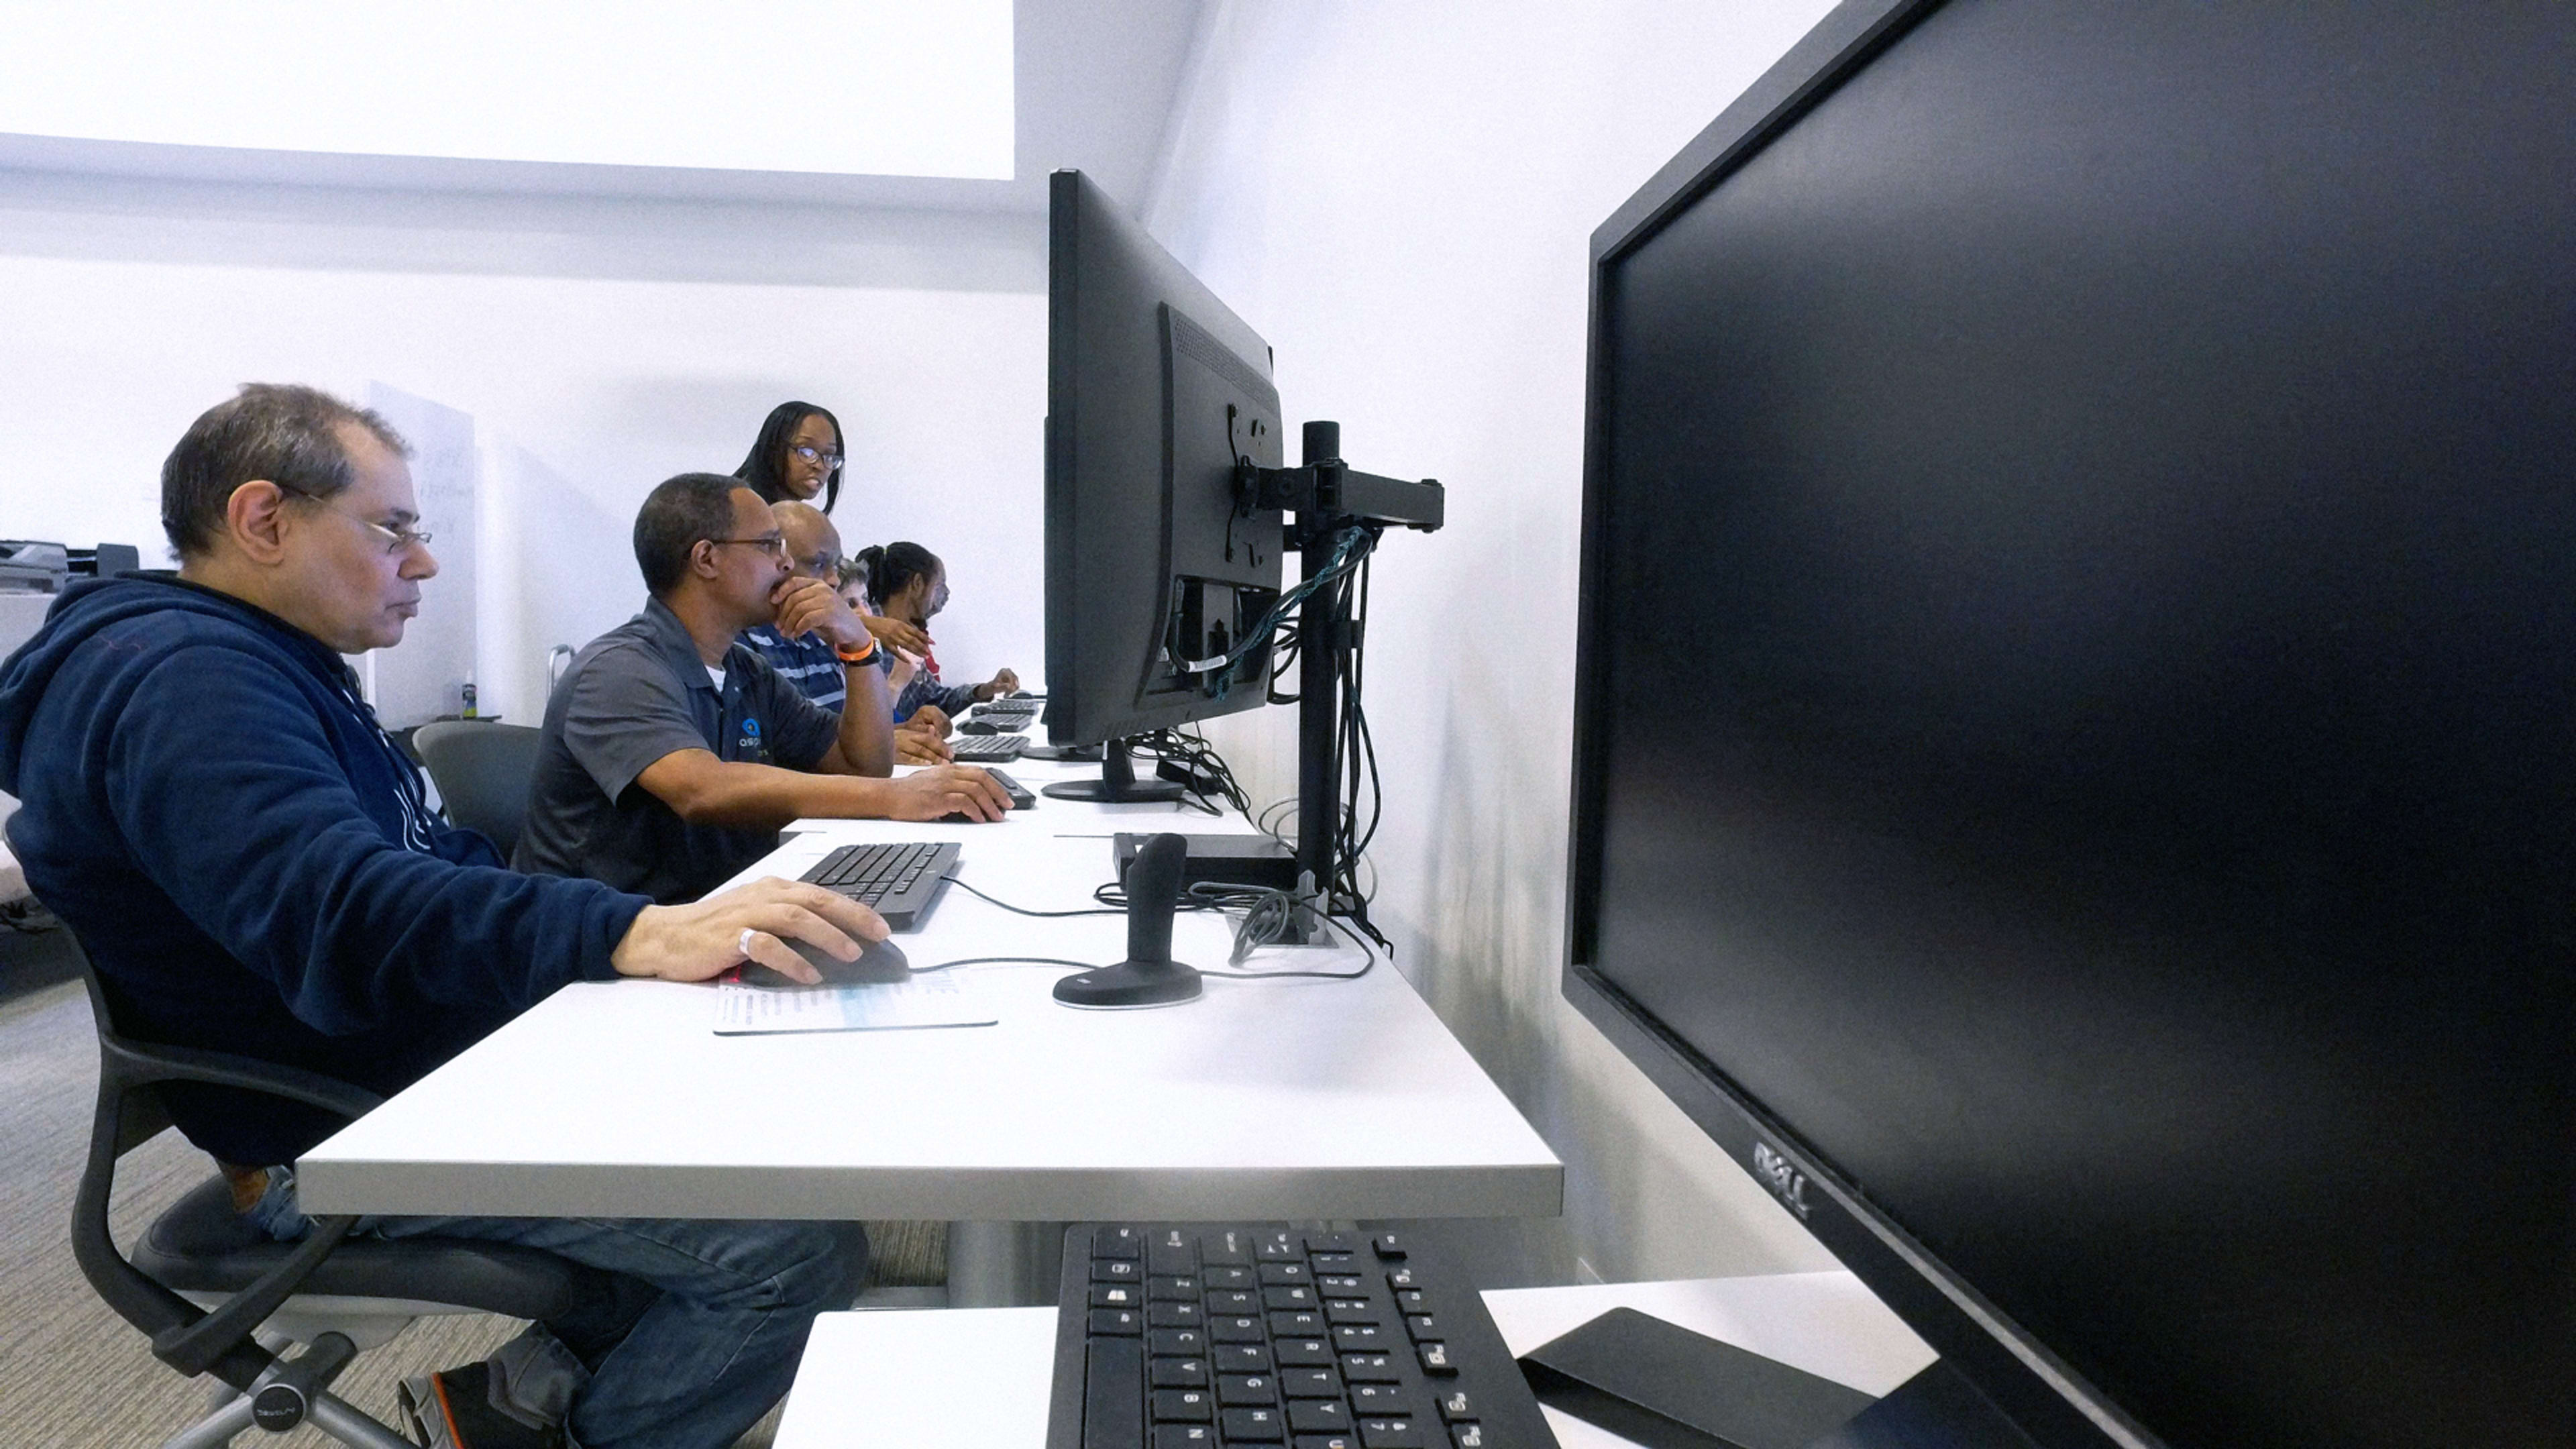 This New Career Center’s Workplace Simulations Prepare People With Disabilities For Jobs